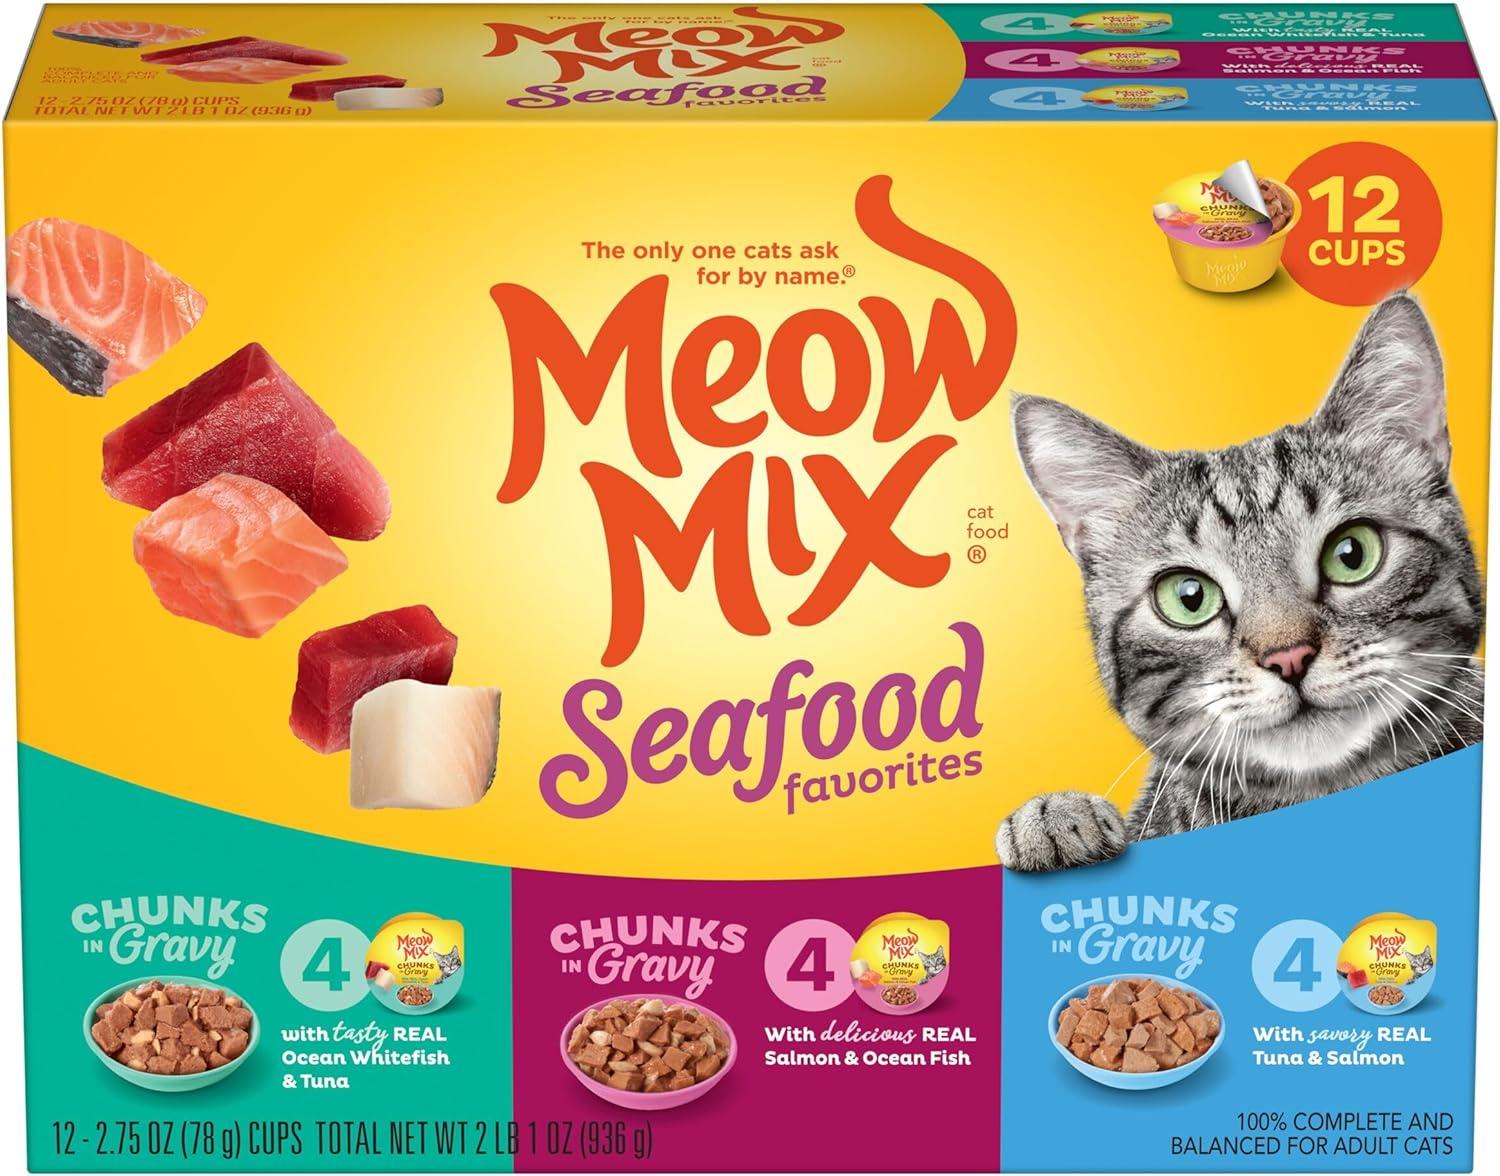 Meow Mix Seafood Favorites Chunks in Gravy Wet Cat Food 12 Pack for $5.39